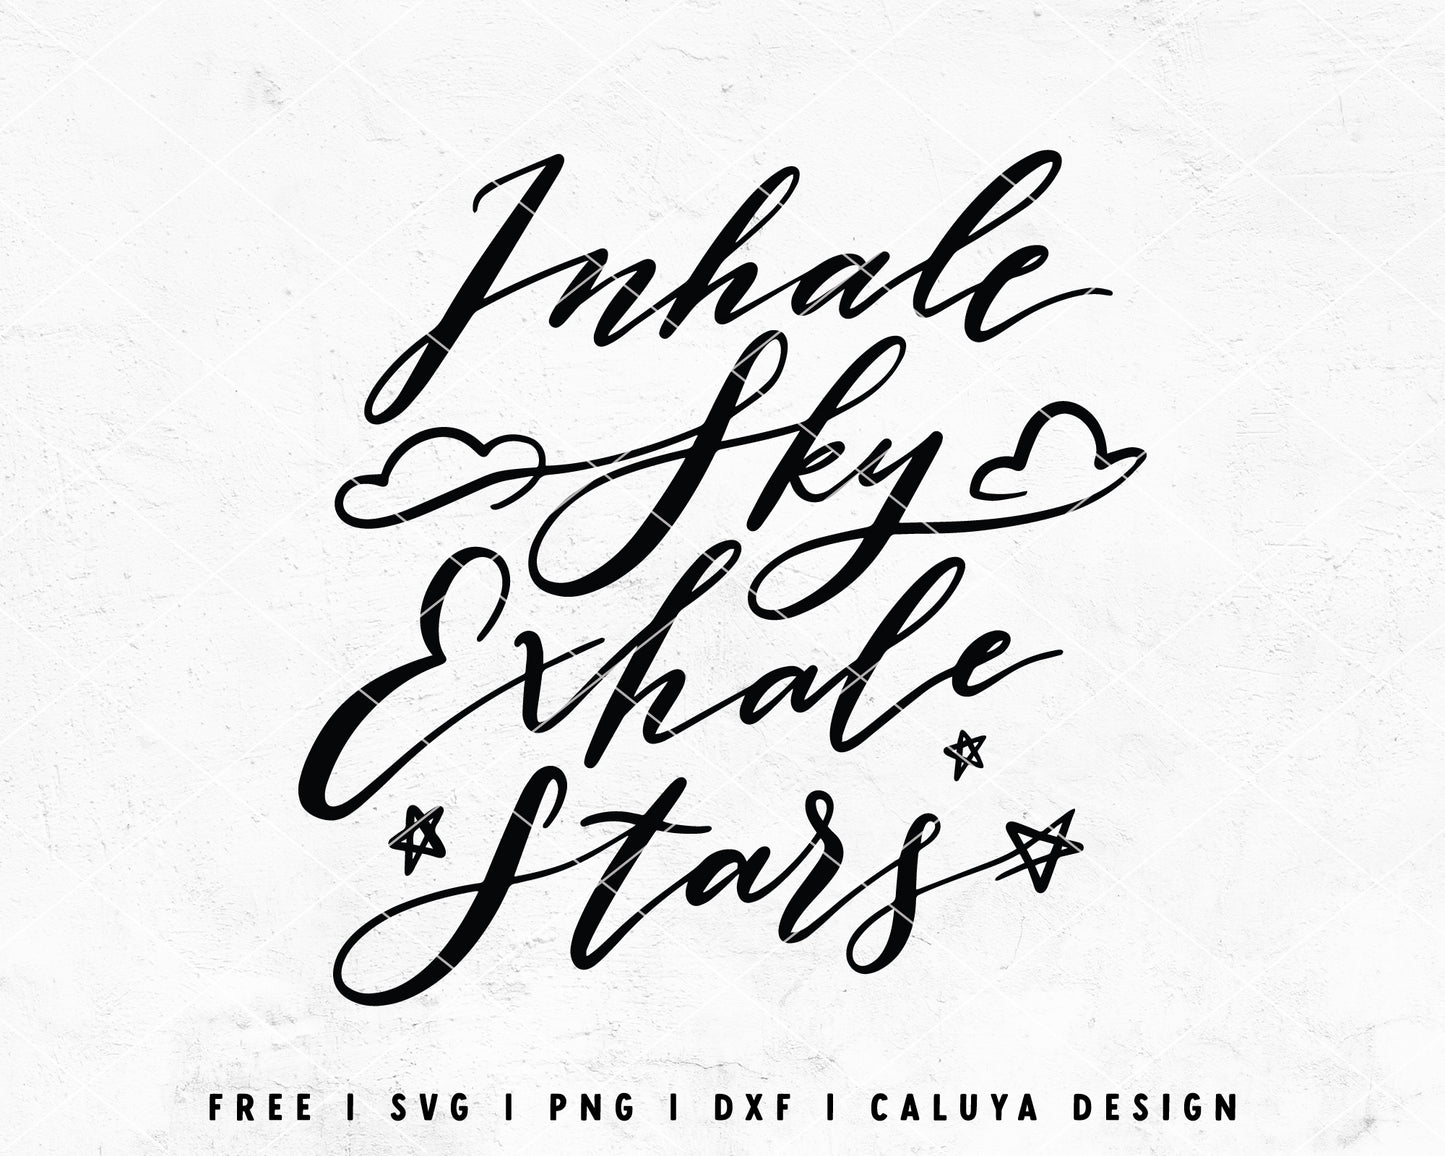 FREE Inspirational SVG | Quote SVG | Inhale Exhale SVG Cut File for Cricut, Cameo Silhouette | Free SVG Cut File